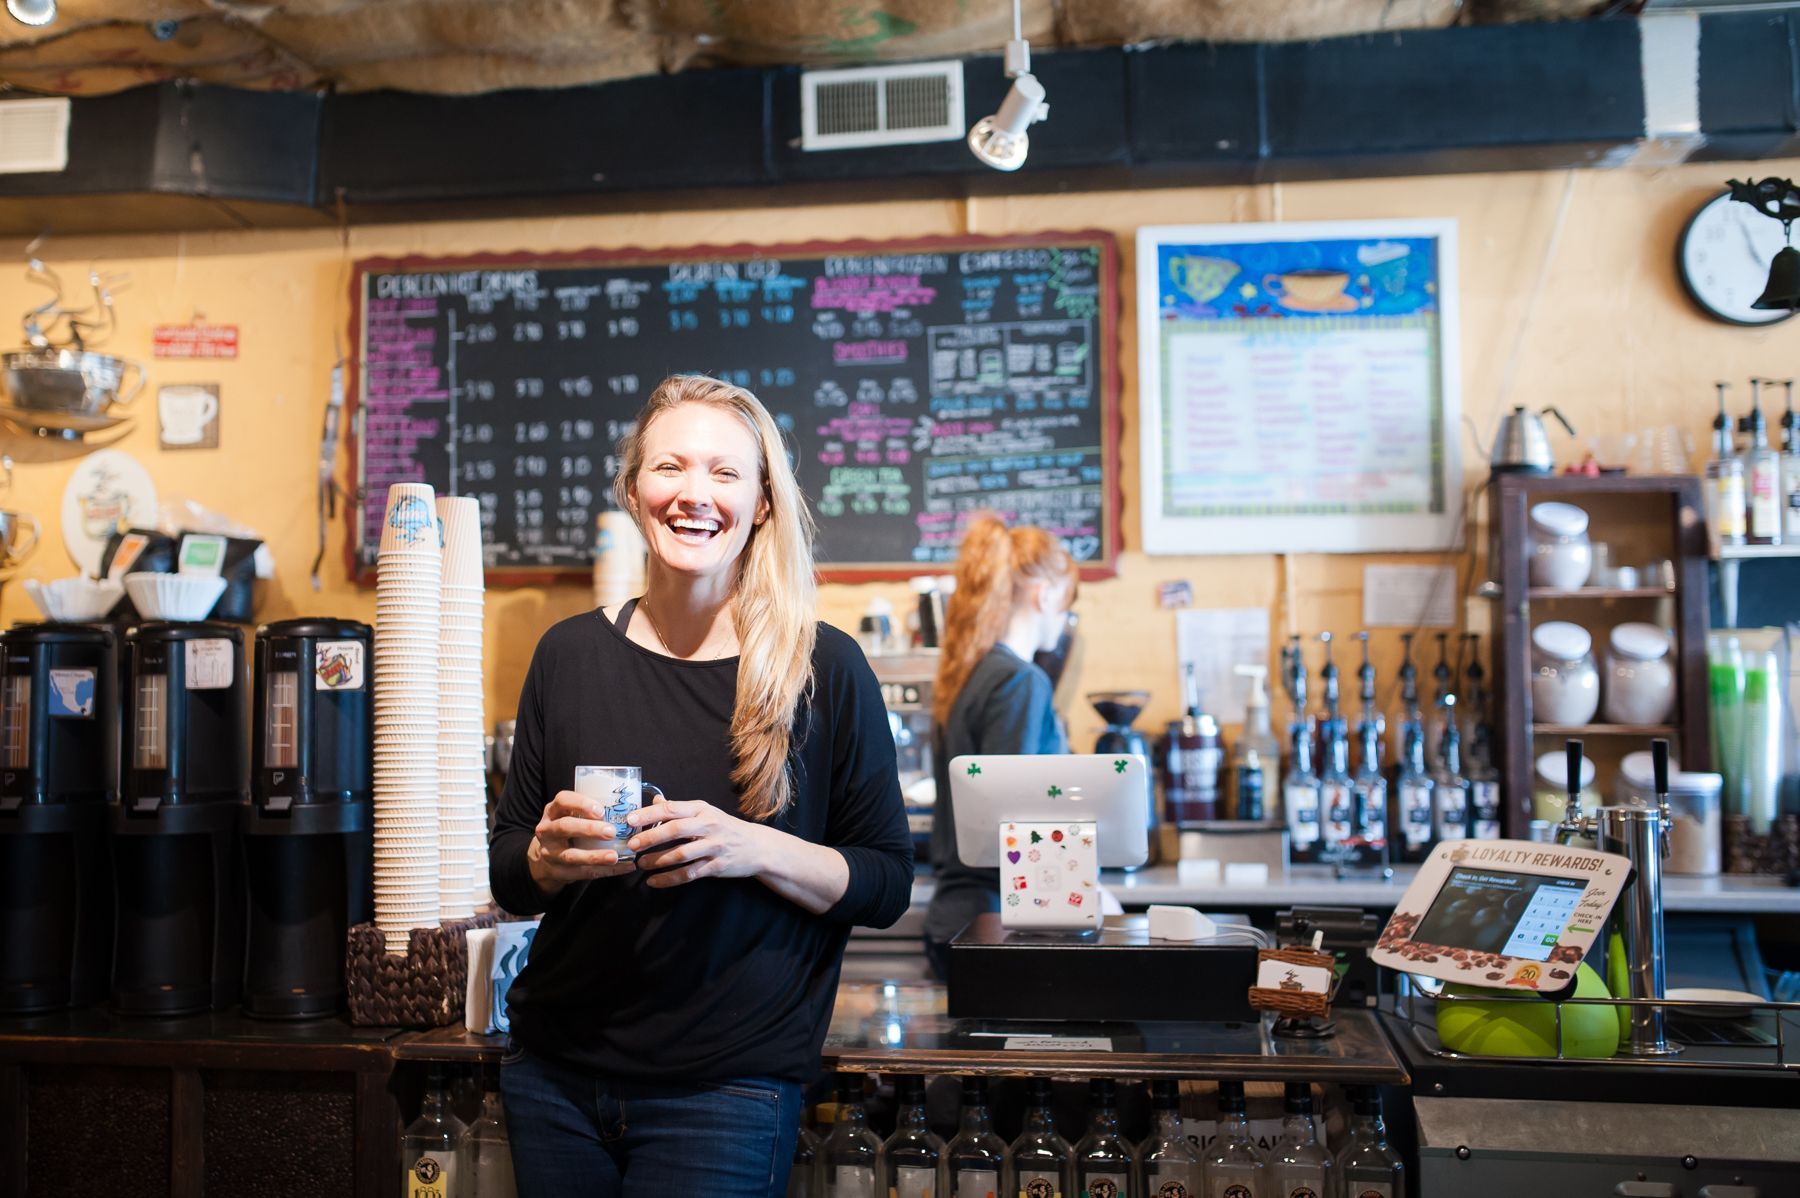 Debbie Maier, owner of DeBeen Espresso, stands with a cup of coffee inside of DeBeen's cafe.